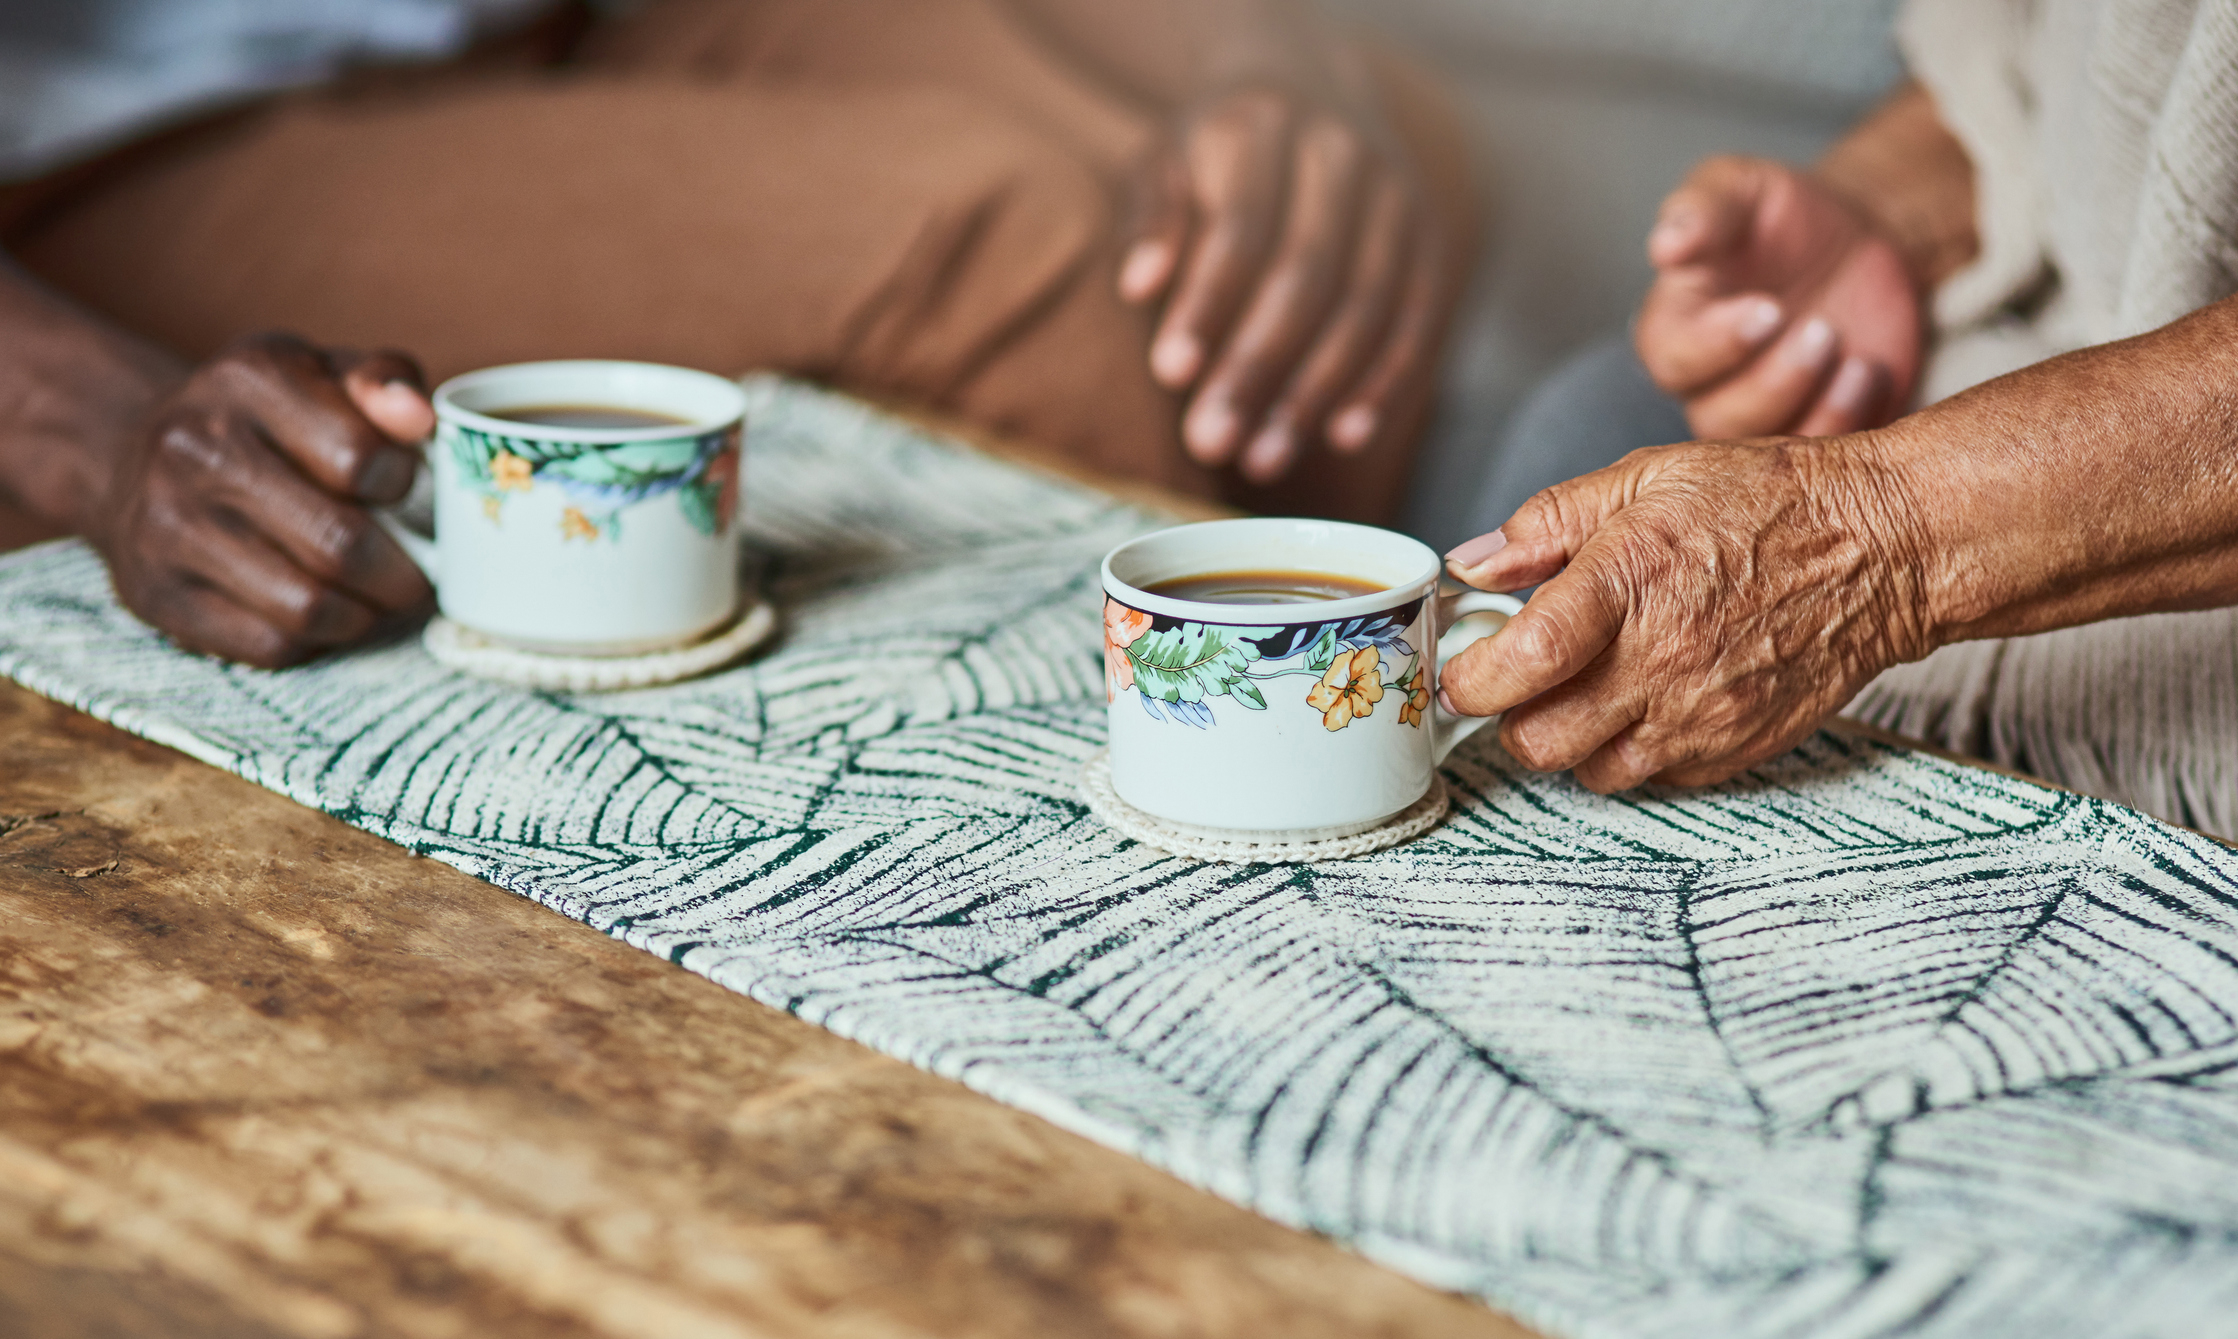 Two people sit at a table, each holding a cup of tea. The setting is casual with a patterned tablecloth and wooden table. Their faces are not visible